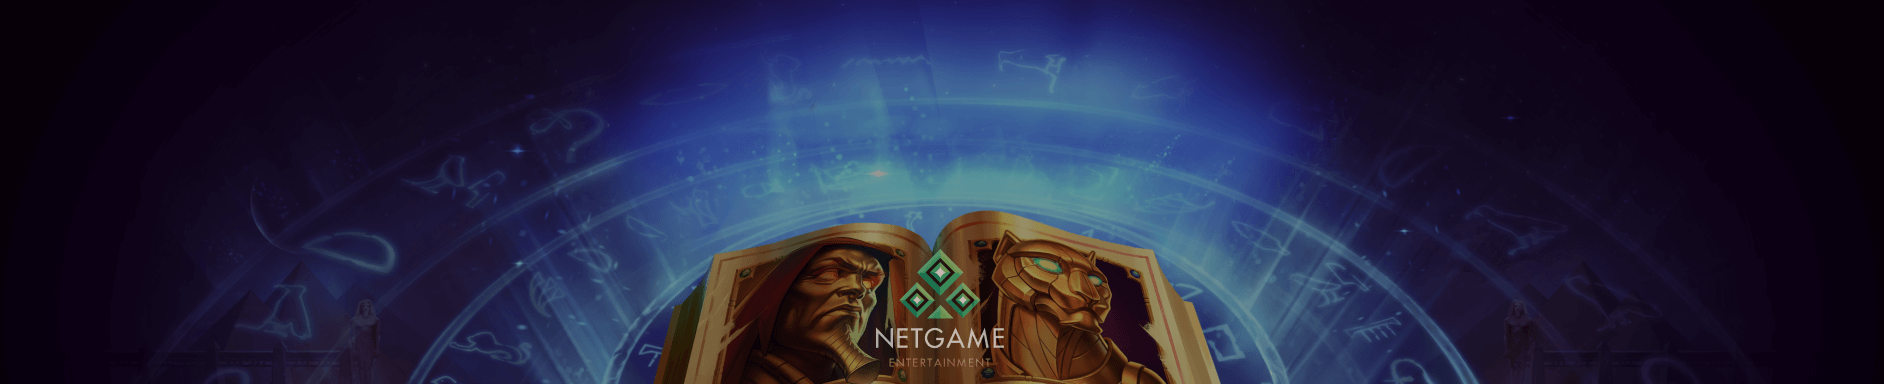 NETGAME RELEASES ITS SPELLBINDING SLOT, BOOK OF NILE: MAGIC CHOICE